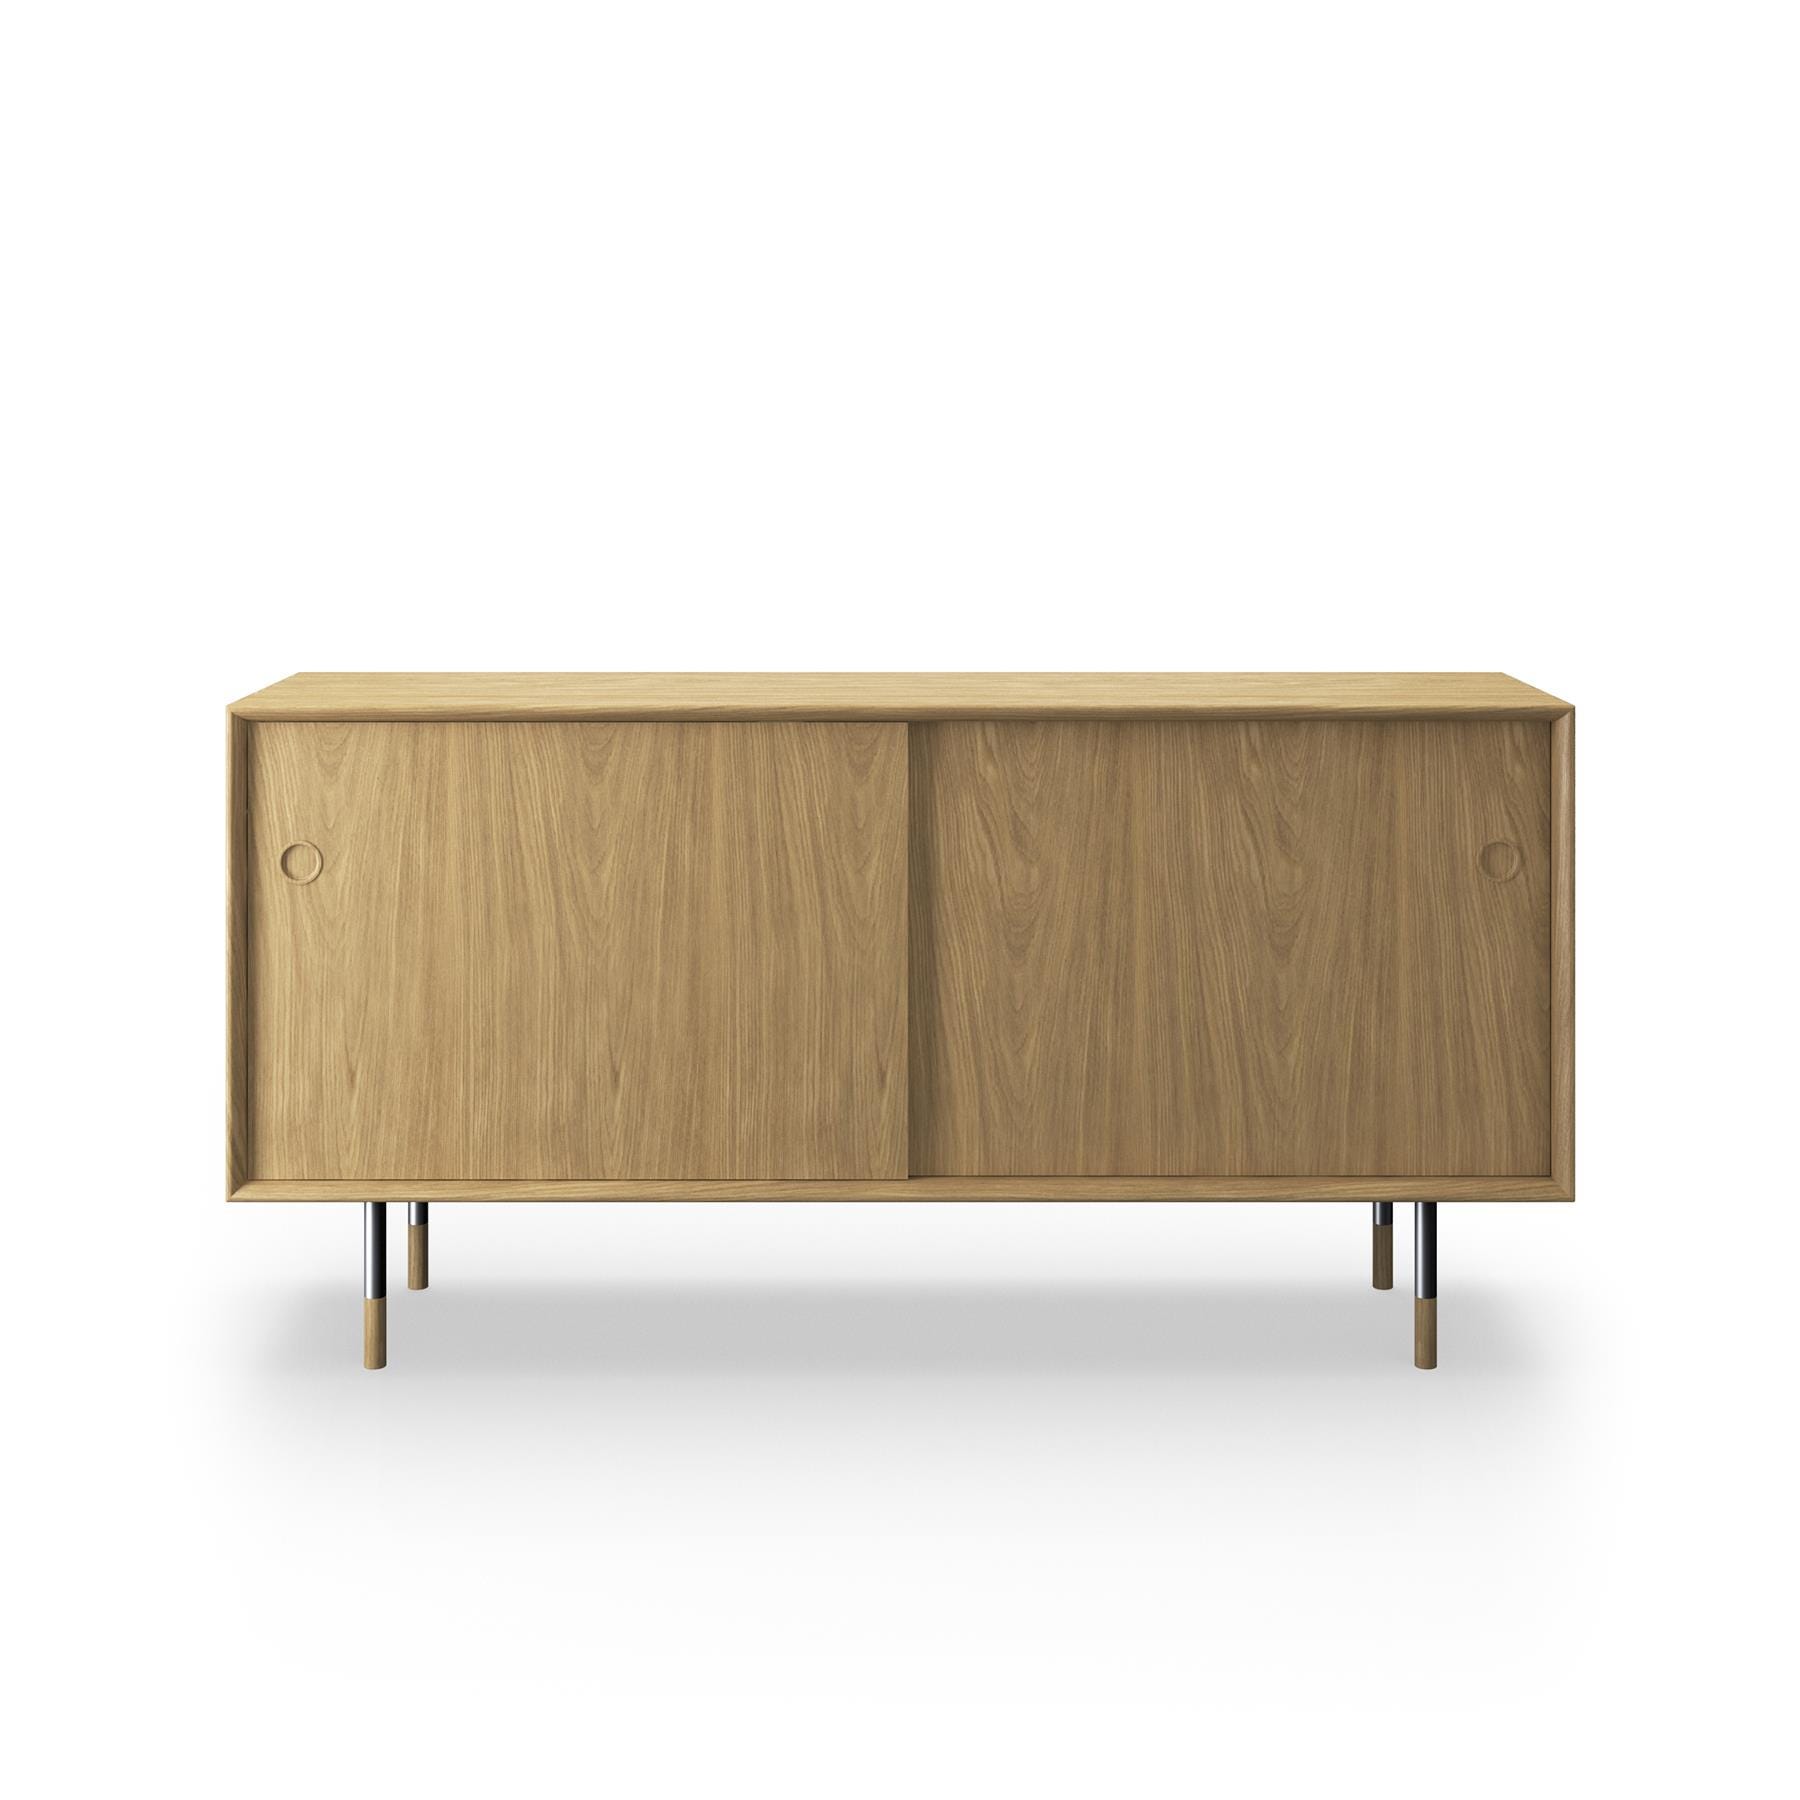 Sibast No 11 Sideboard White Oiled Oak Natural Front Metal Legs Light Wood Designer Furniture From Holloways Of Ludlow